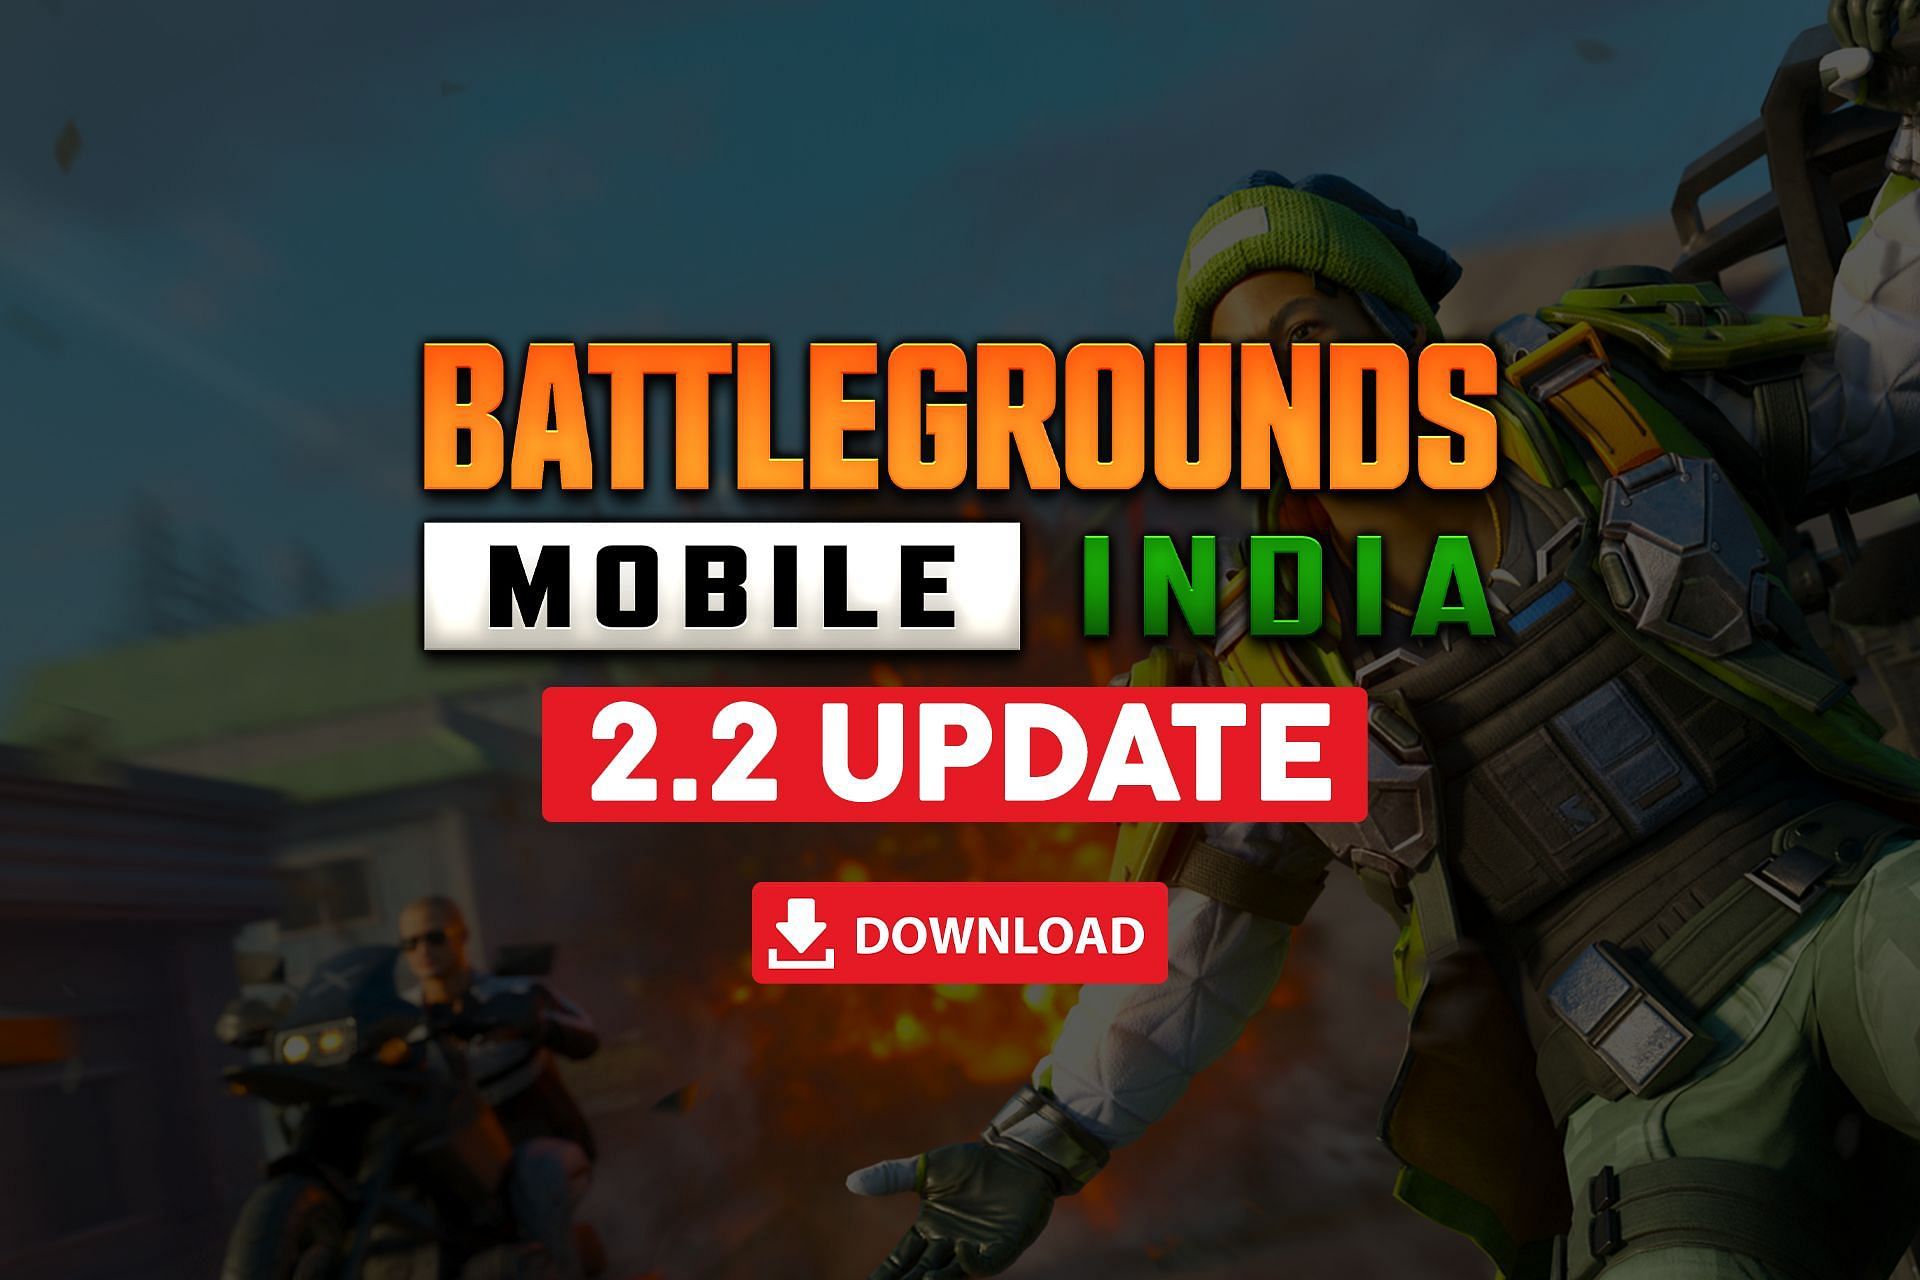 The download links of BGMI 2.2 update have caught the attention of many users (Image via Sportskeeda)